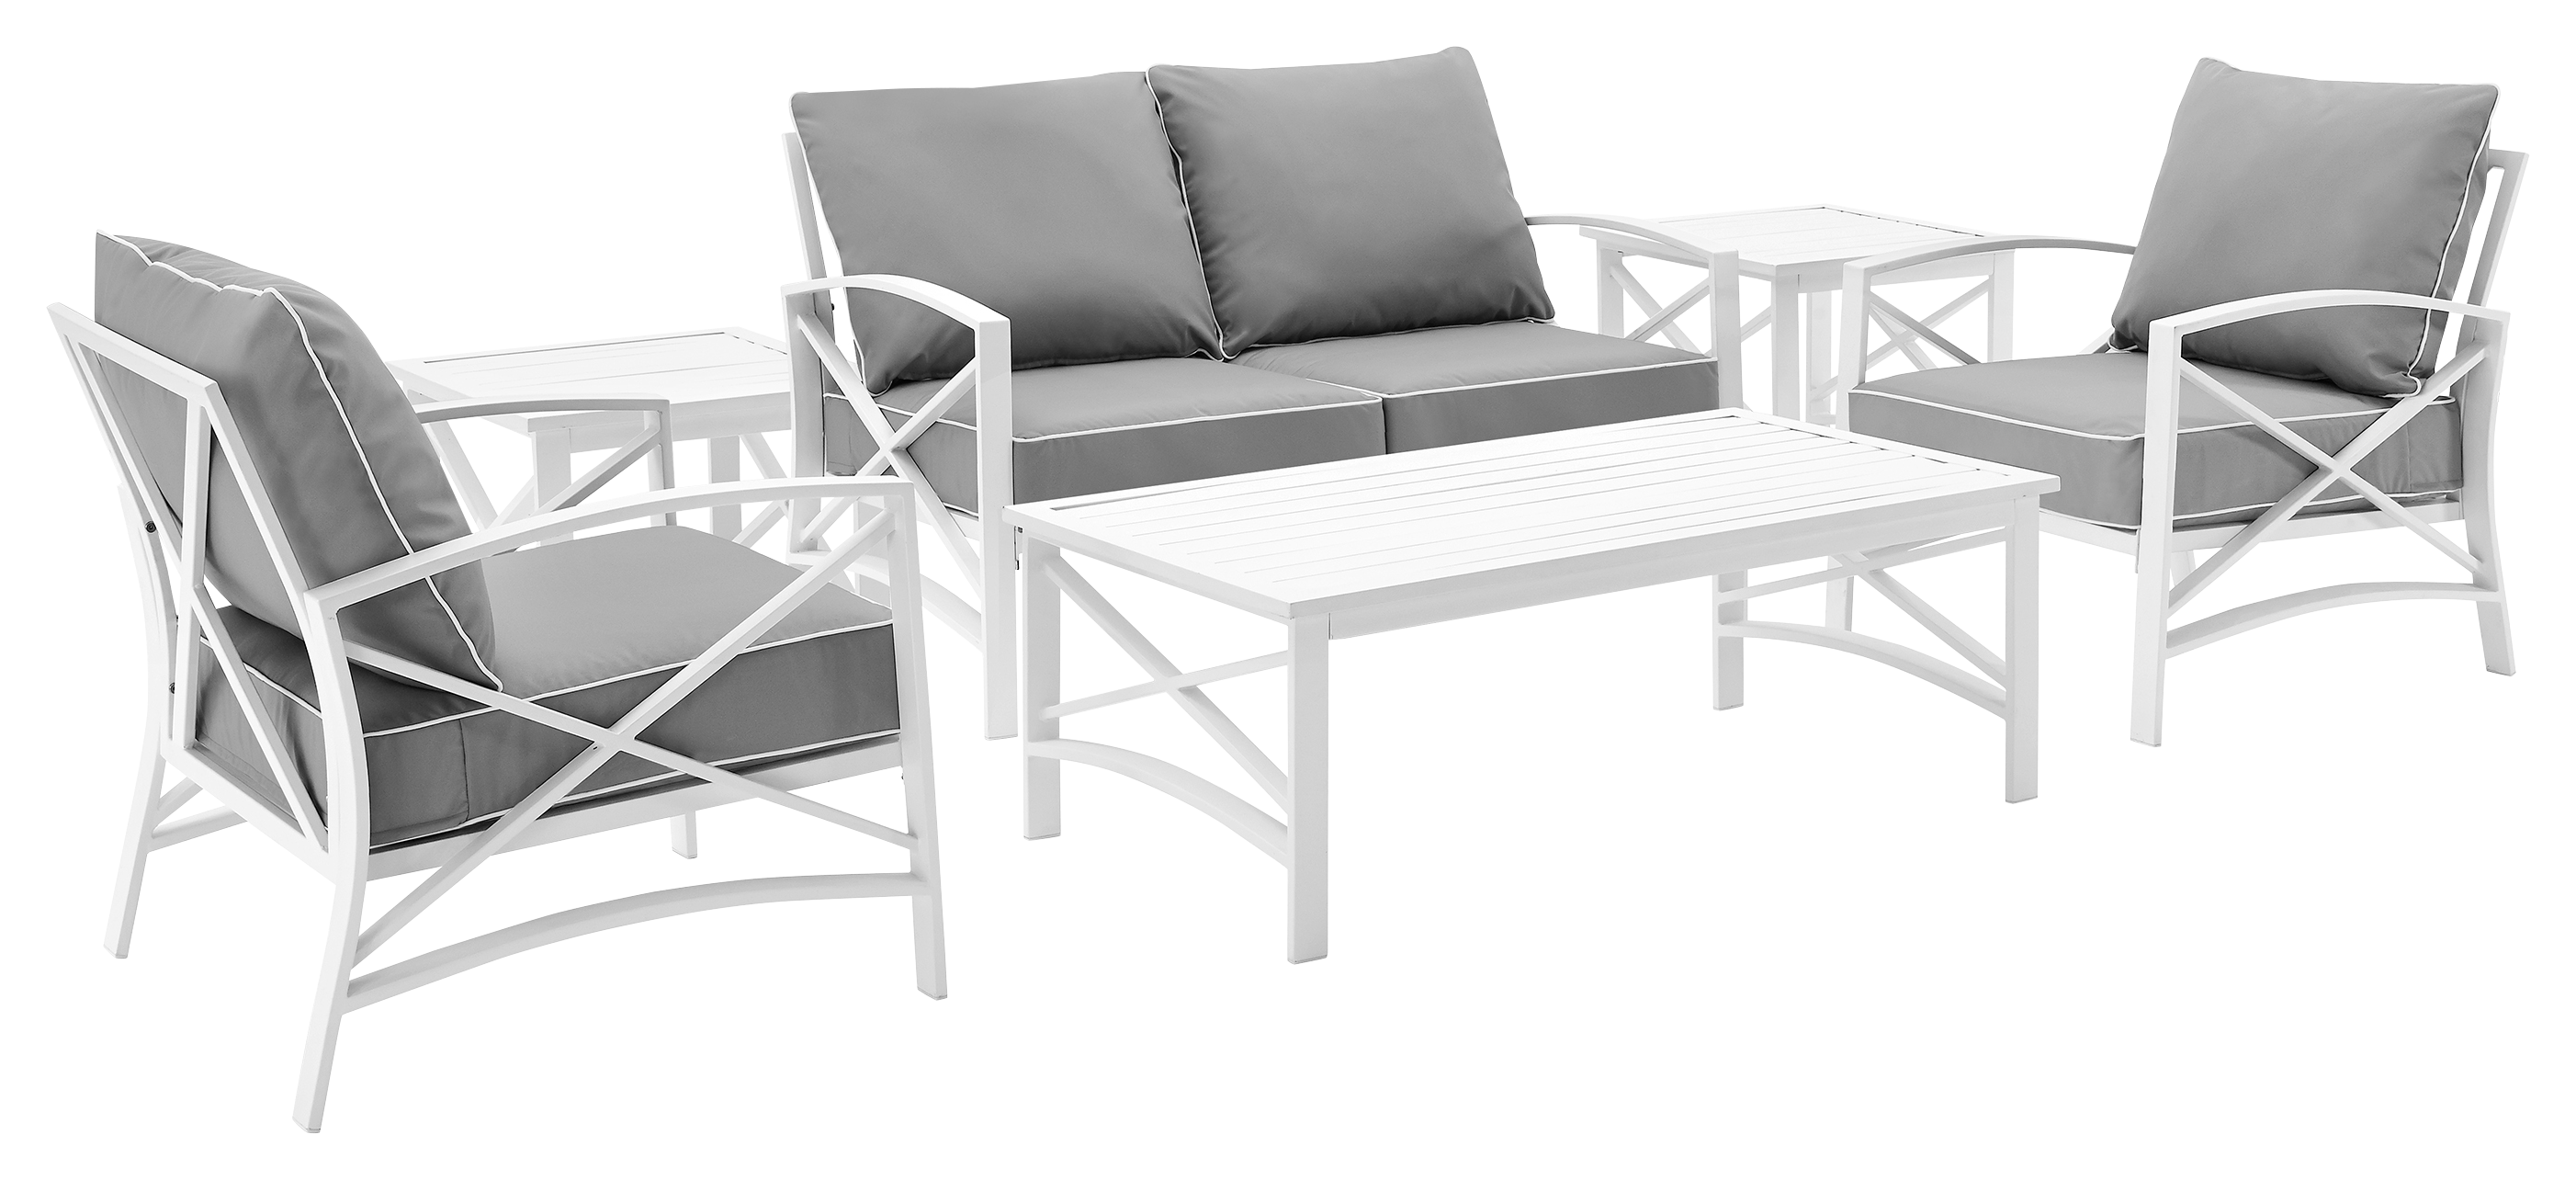 Crosley Kaplan Loveseat, Armchairs, And Tables 6 Piece Outdoor Metal Patio Furniture Set Gray